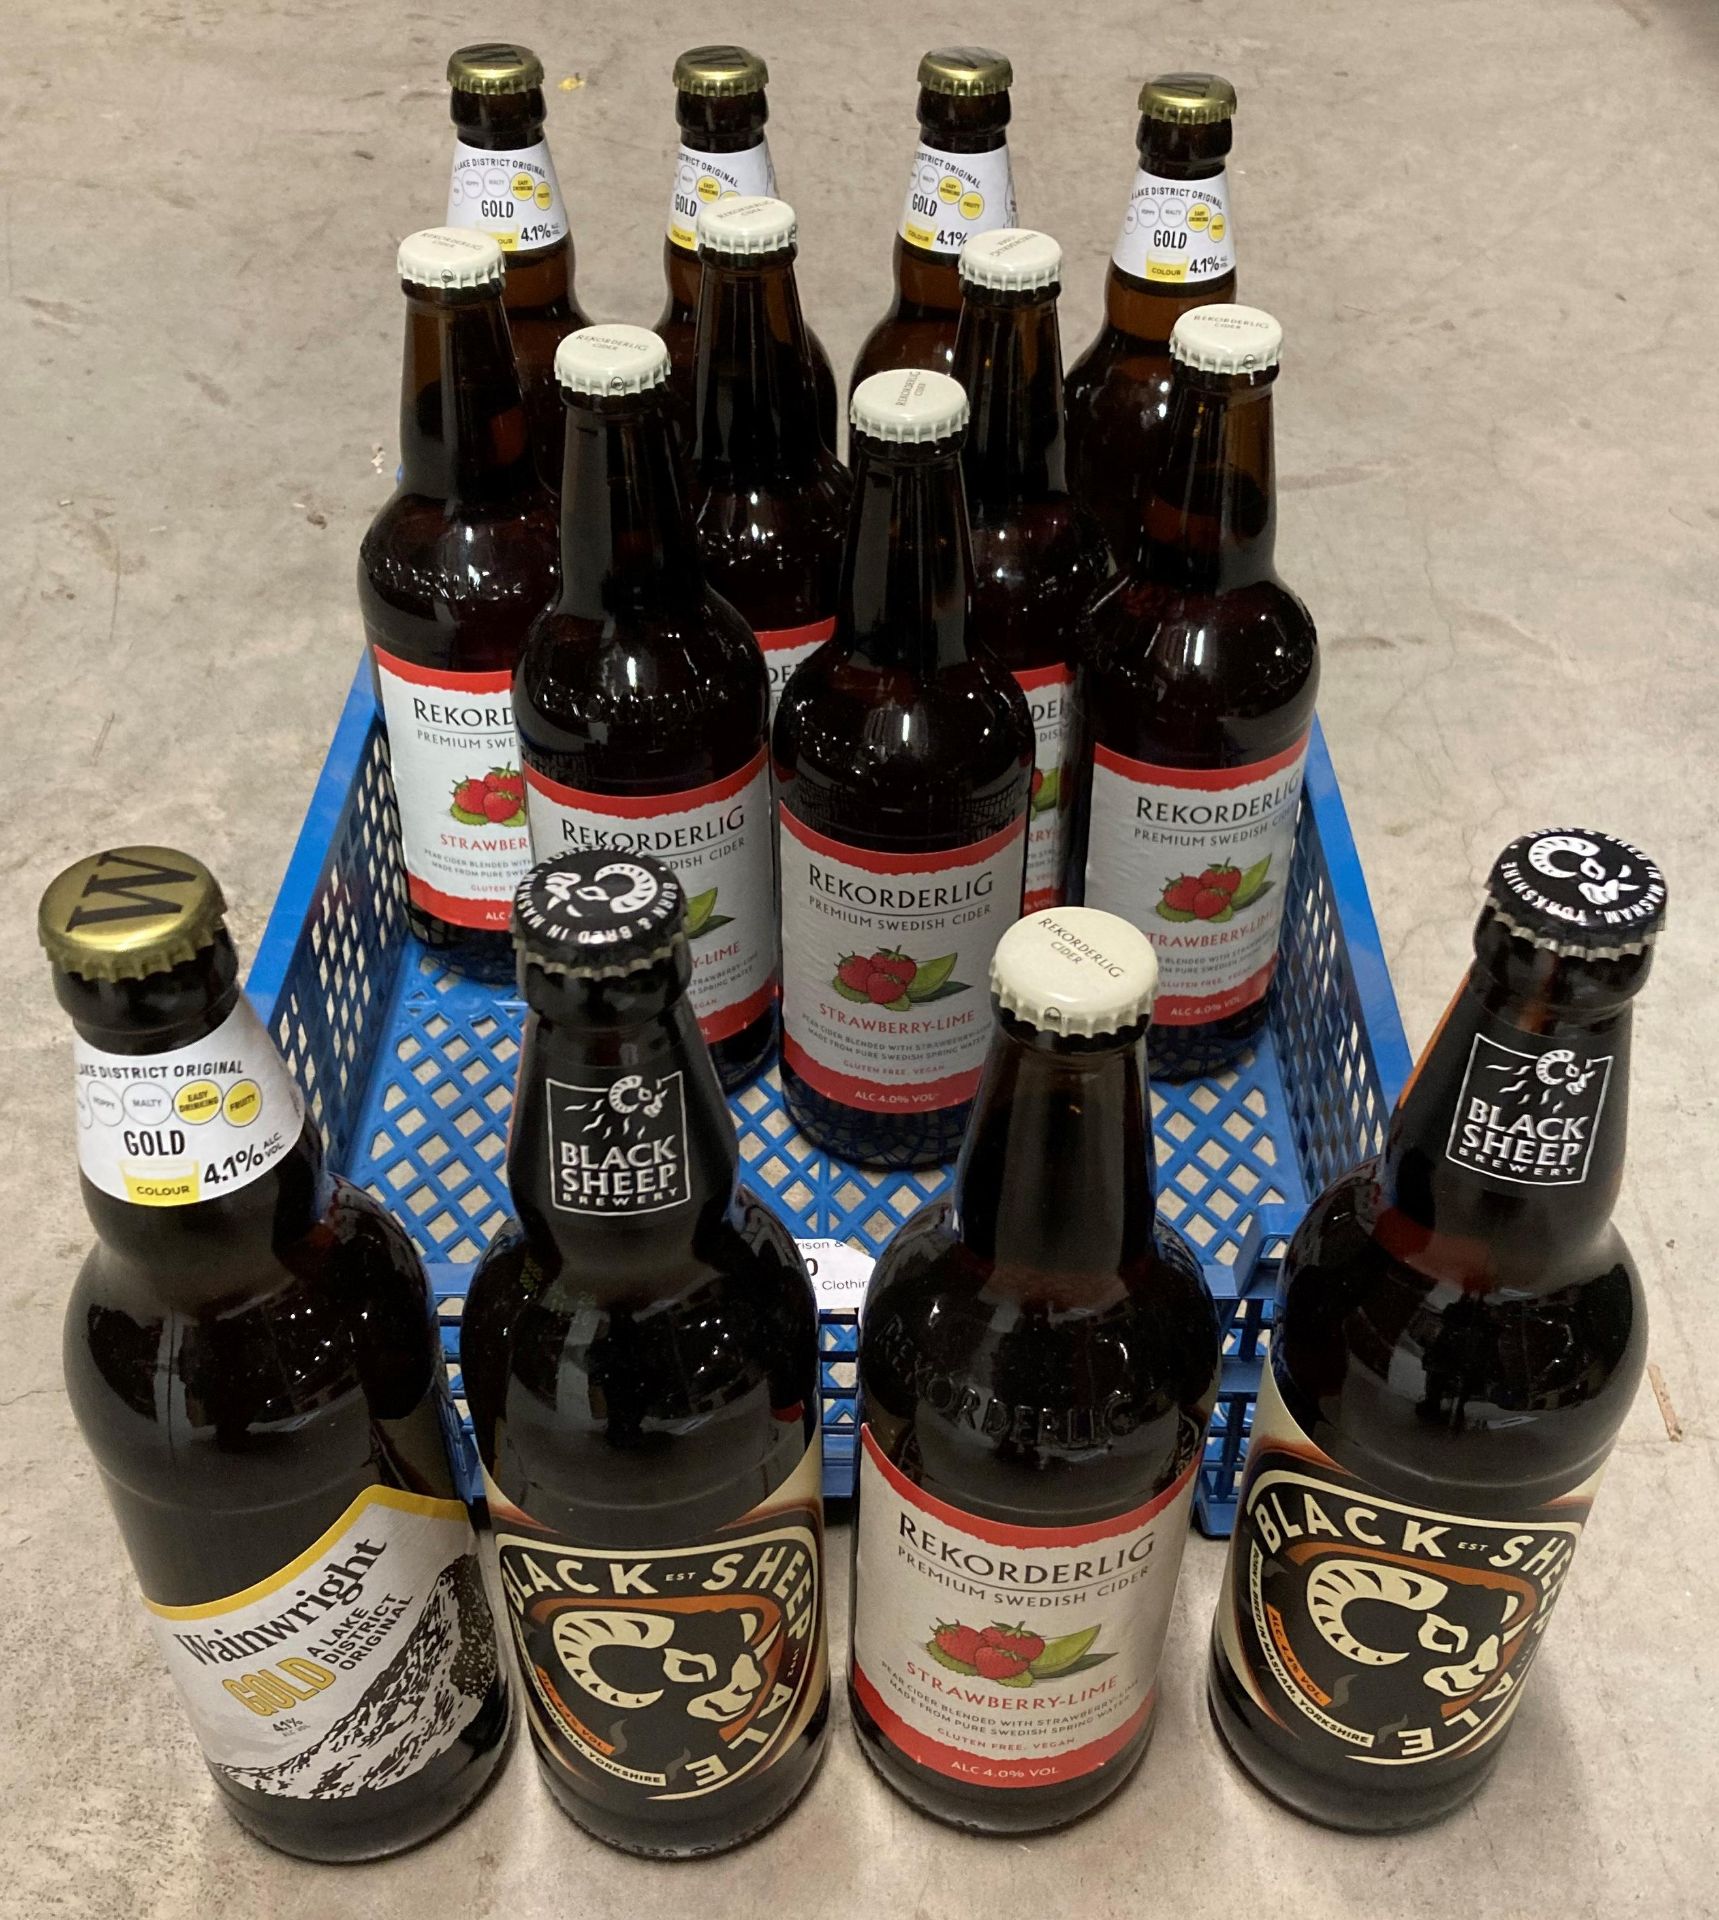 Contents to crate - 7 x 500ml bottles Rekorderlig strawberry & lime cider,